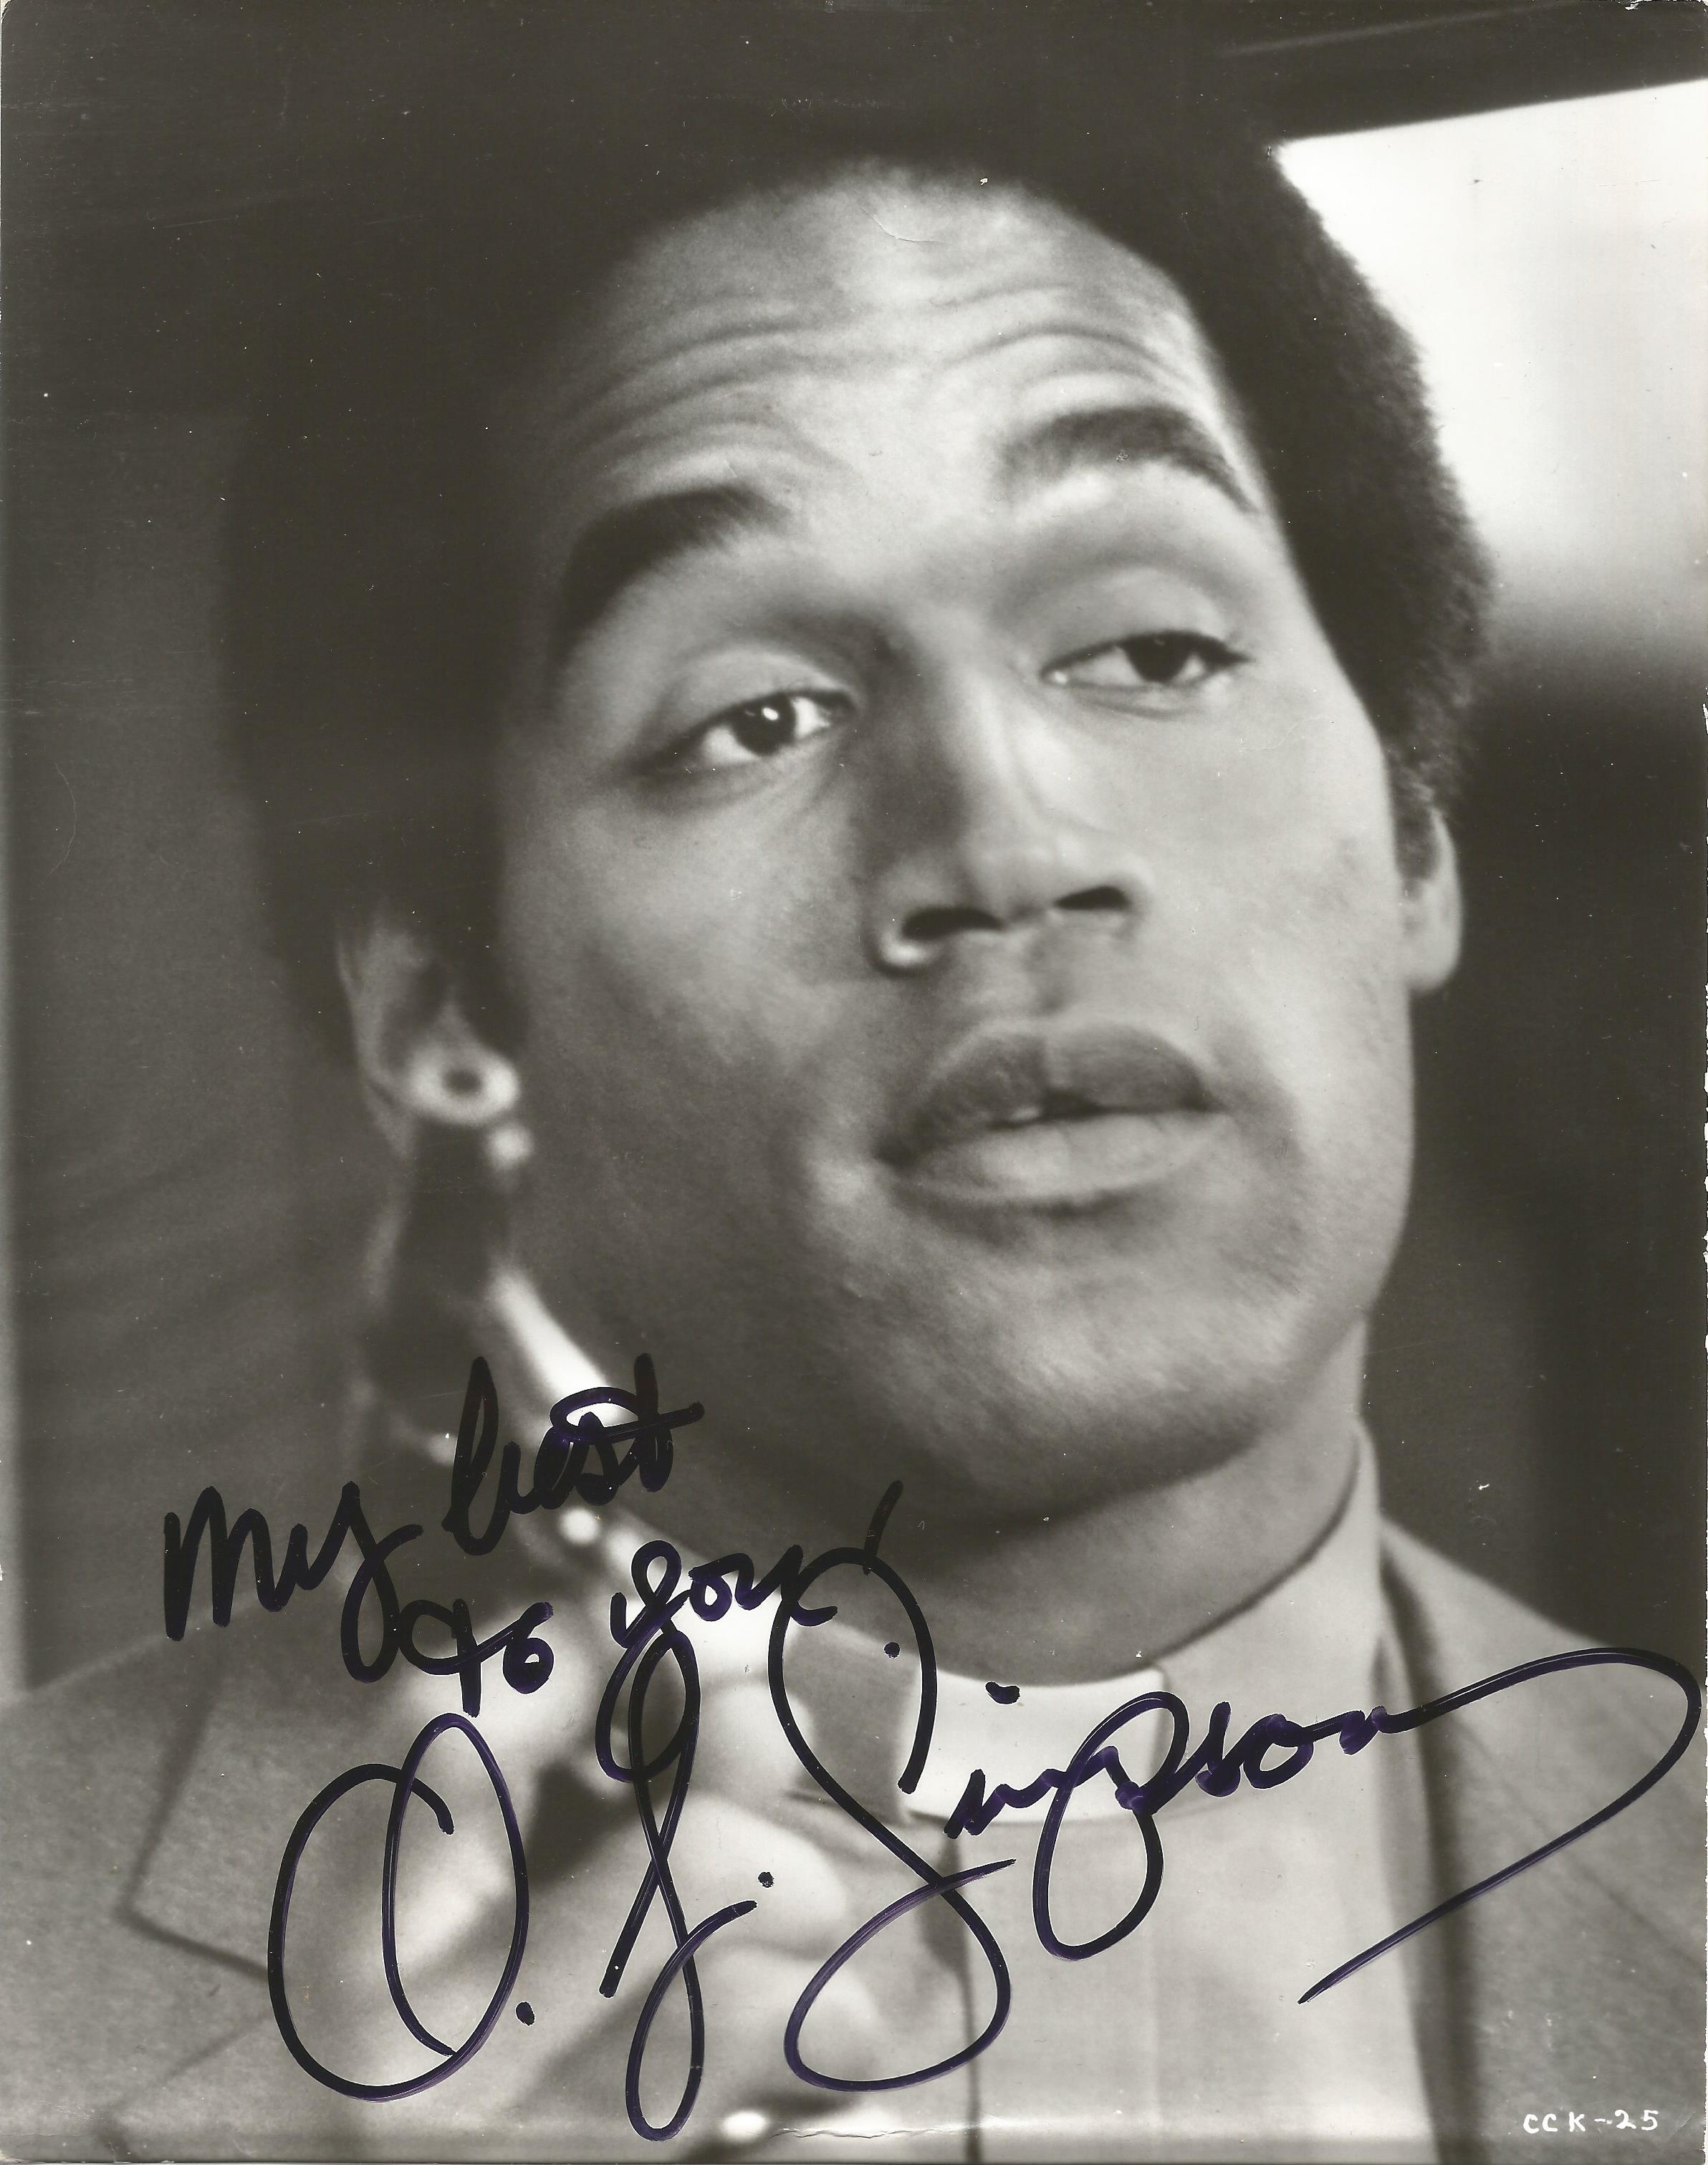 American former football running back and Actor O J Simpson 10x8 signed black and white image from